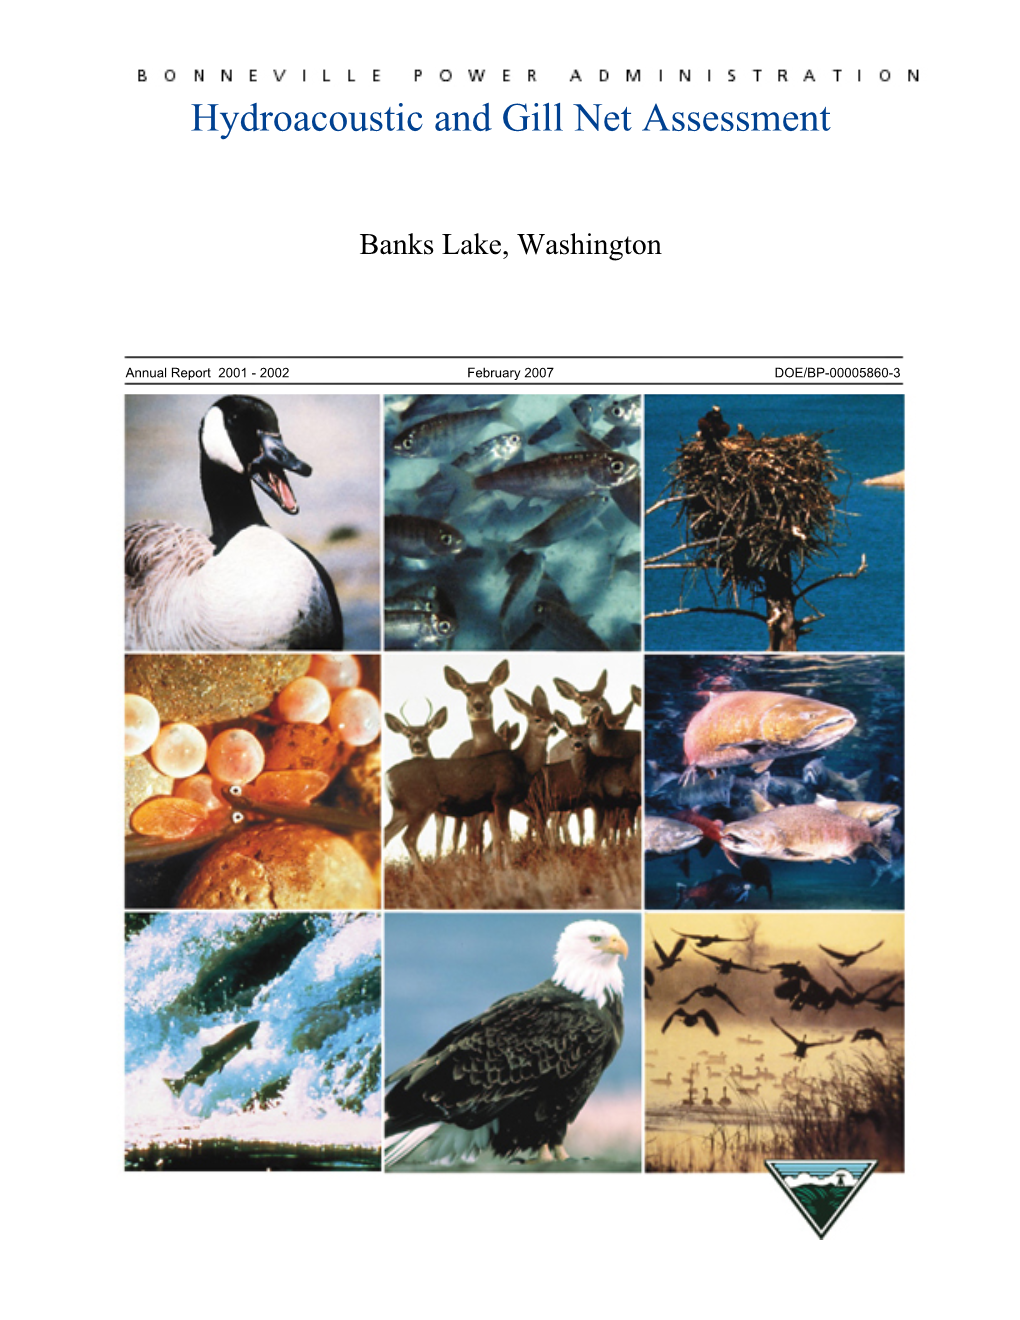 Hydroacoustic and Gill Net Assessment: Banks Lake, Washington